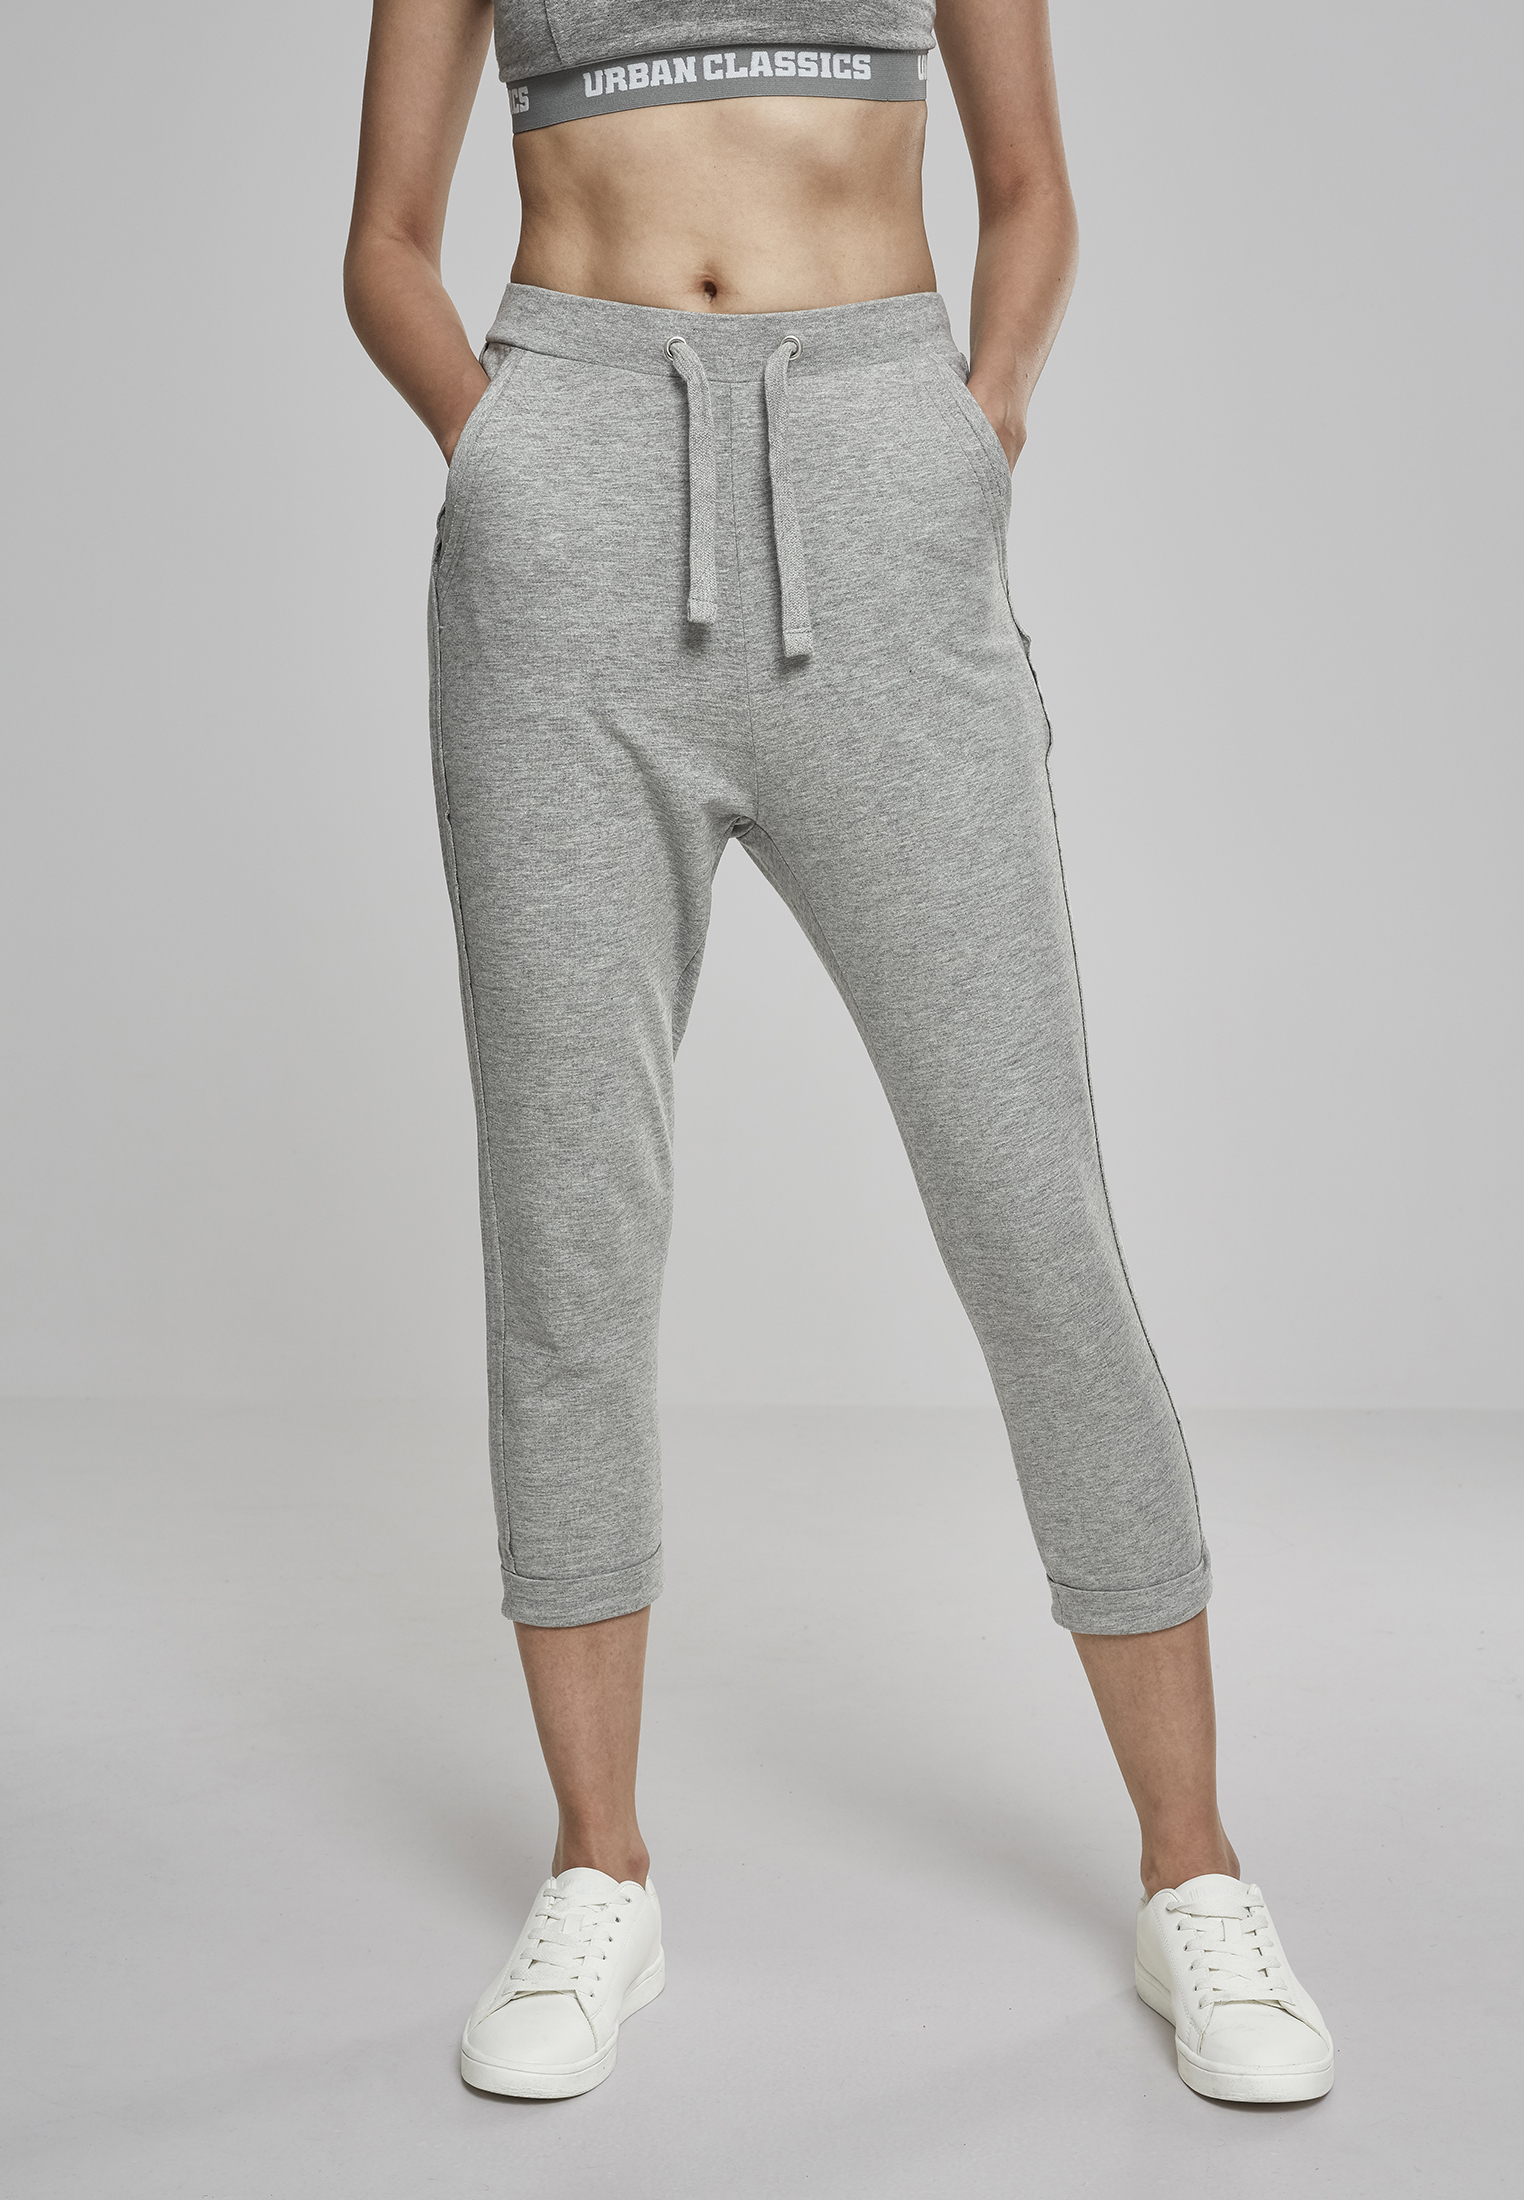 Curvy Ladies Open Edge Terry Turn Up Pants in Farbe grey